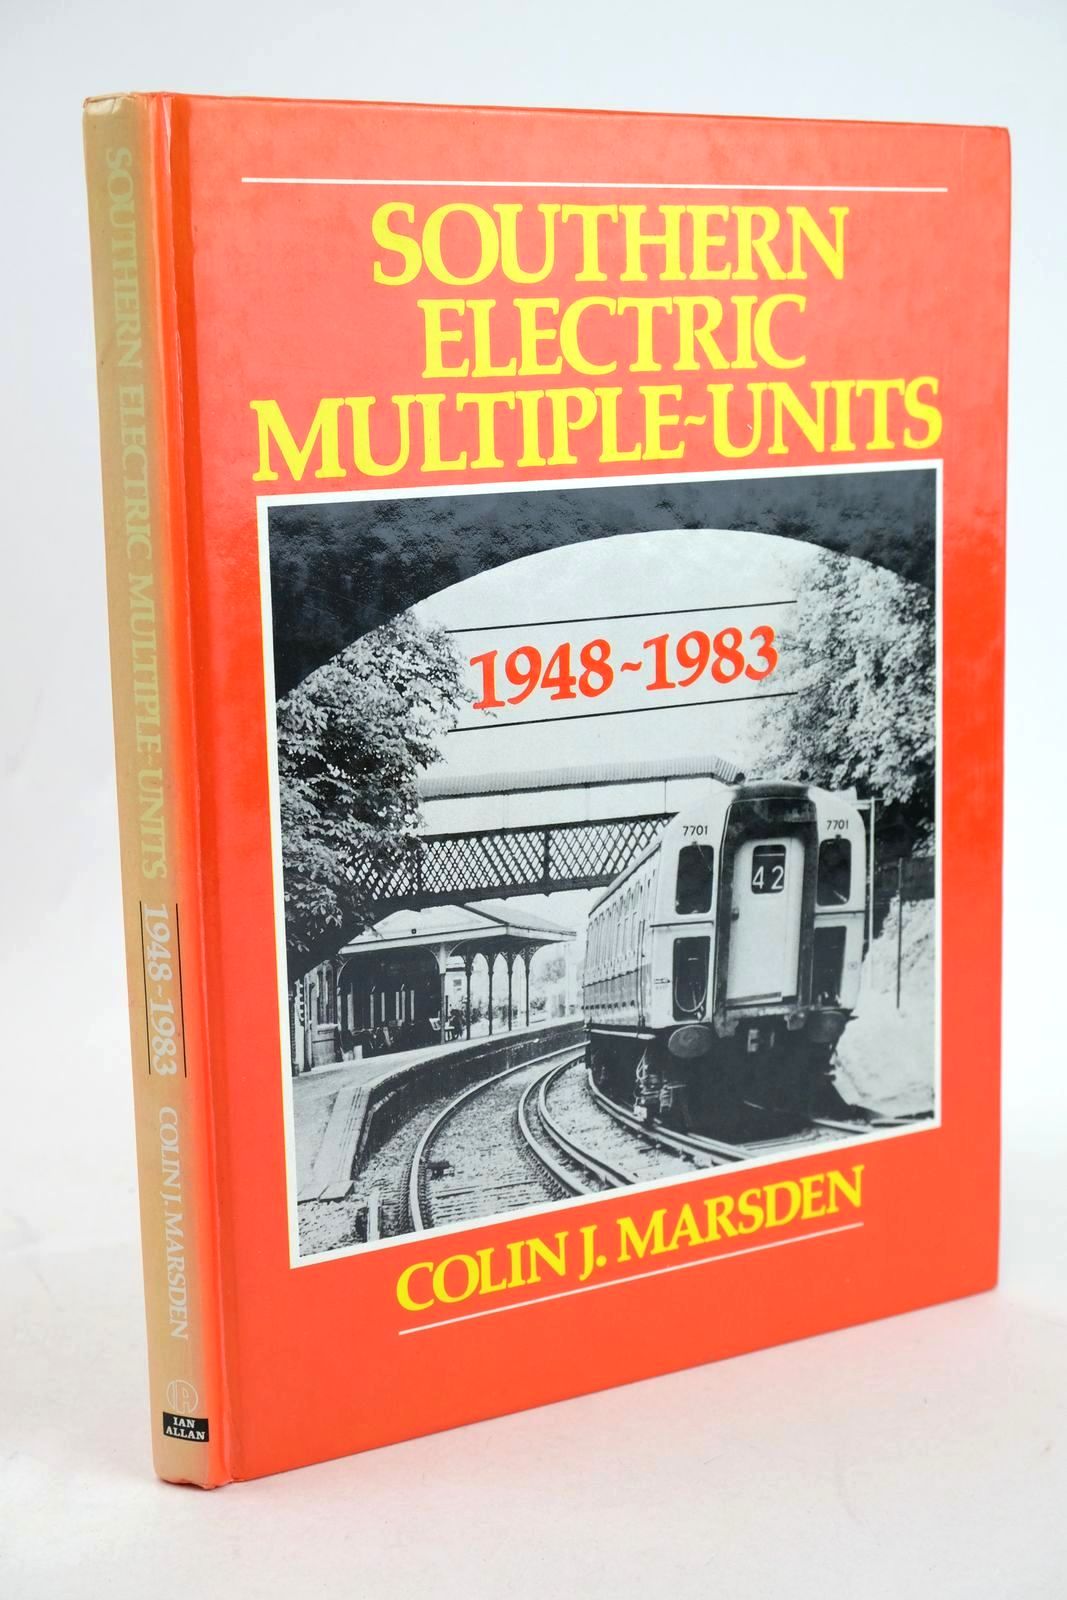 Photo of SOUTHERN ELECTRIC MULTIPLE UNITS 1948-1983 written by Marsden, Colin J. published by Ian Allan Ltd. (STOCK CODE: 1327410)  for sale by Stella & Rose's Books